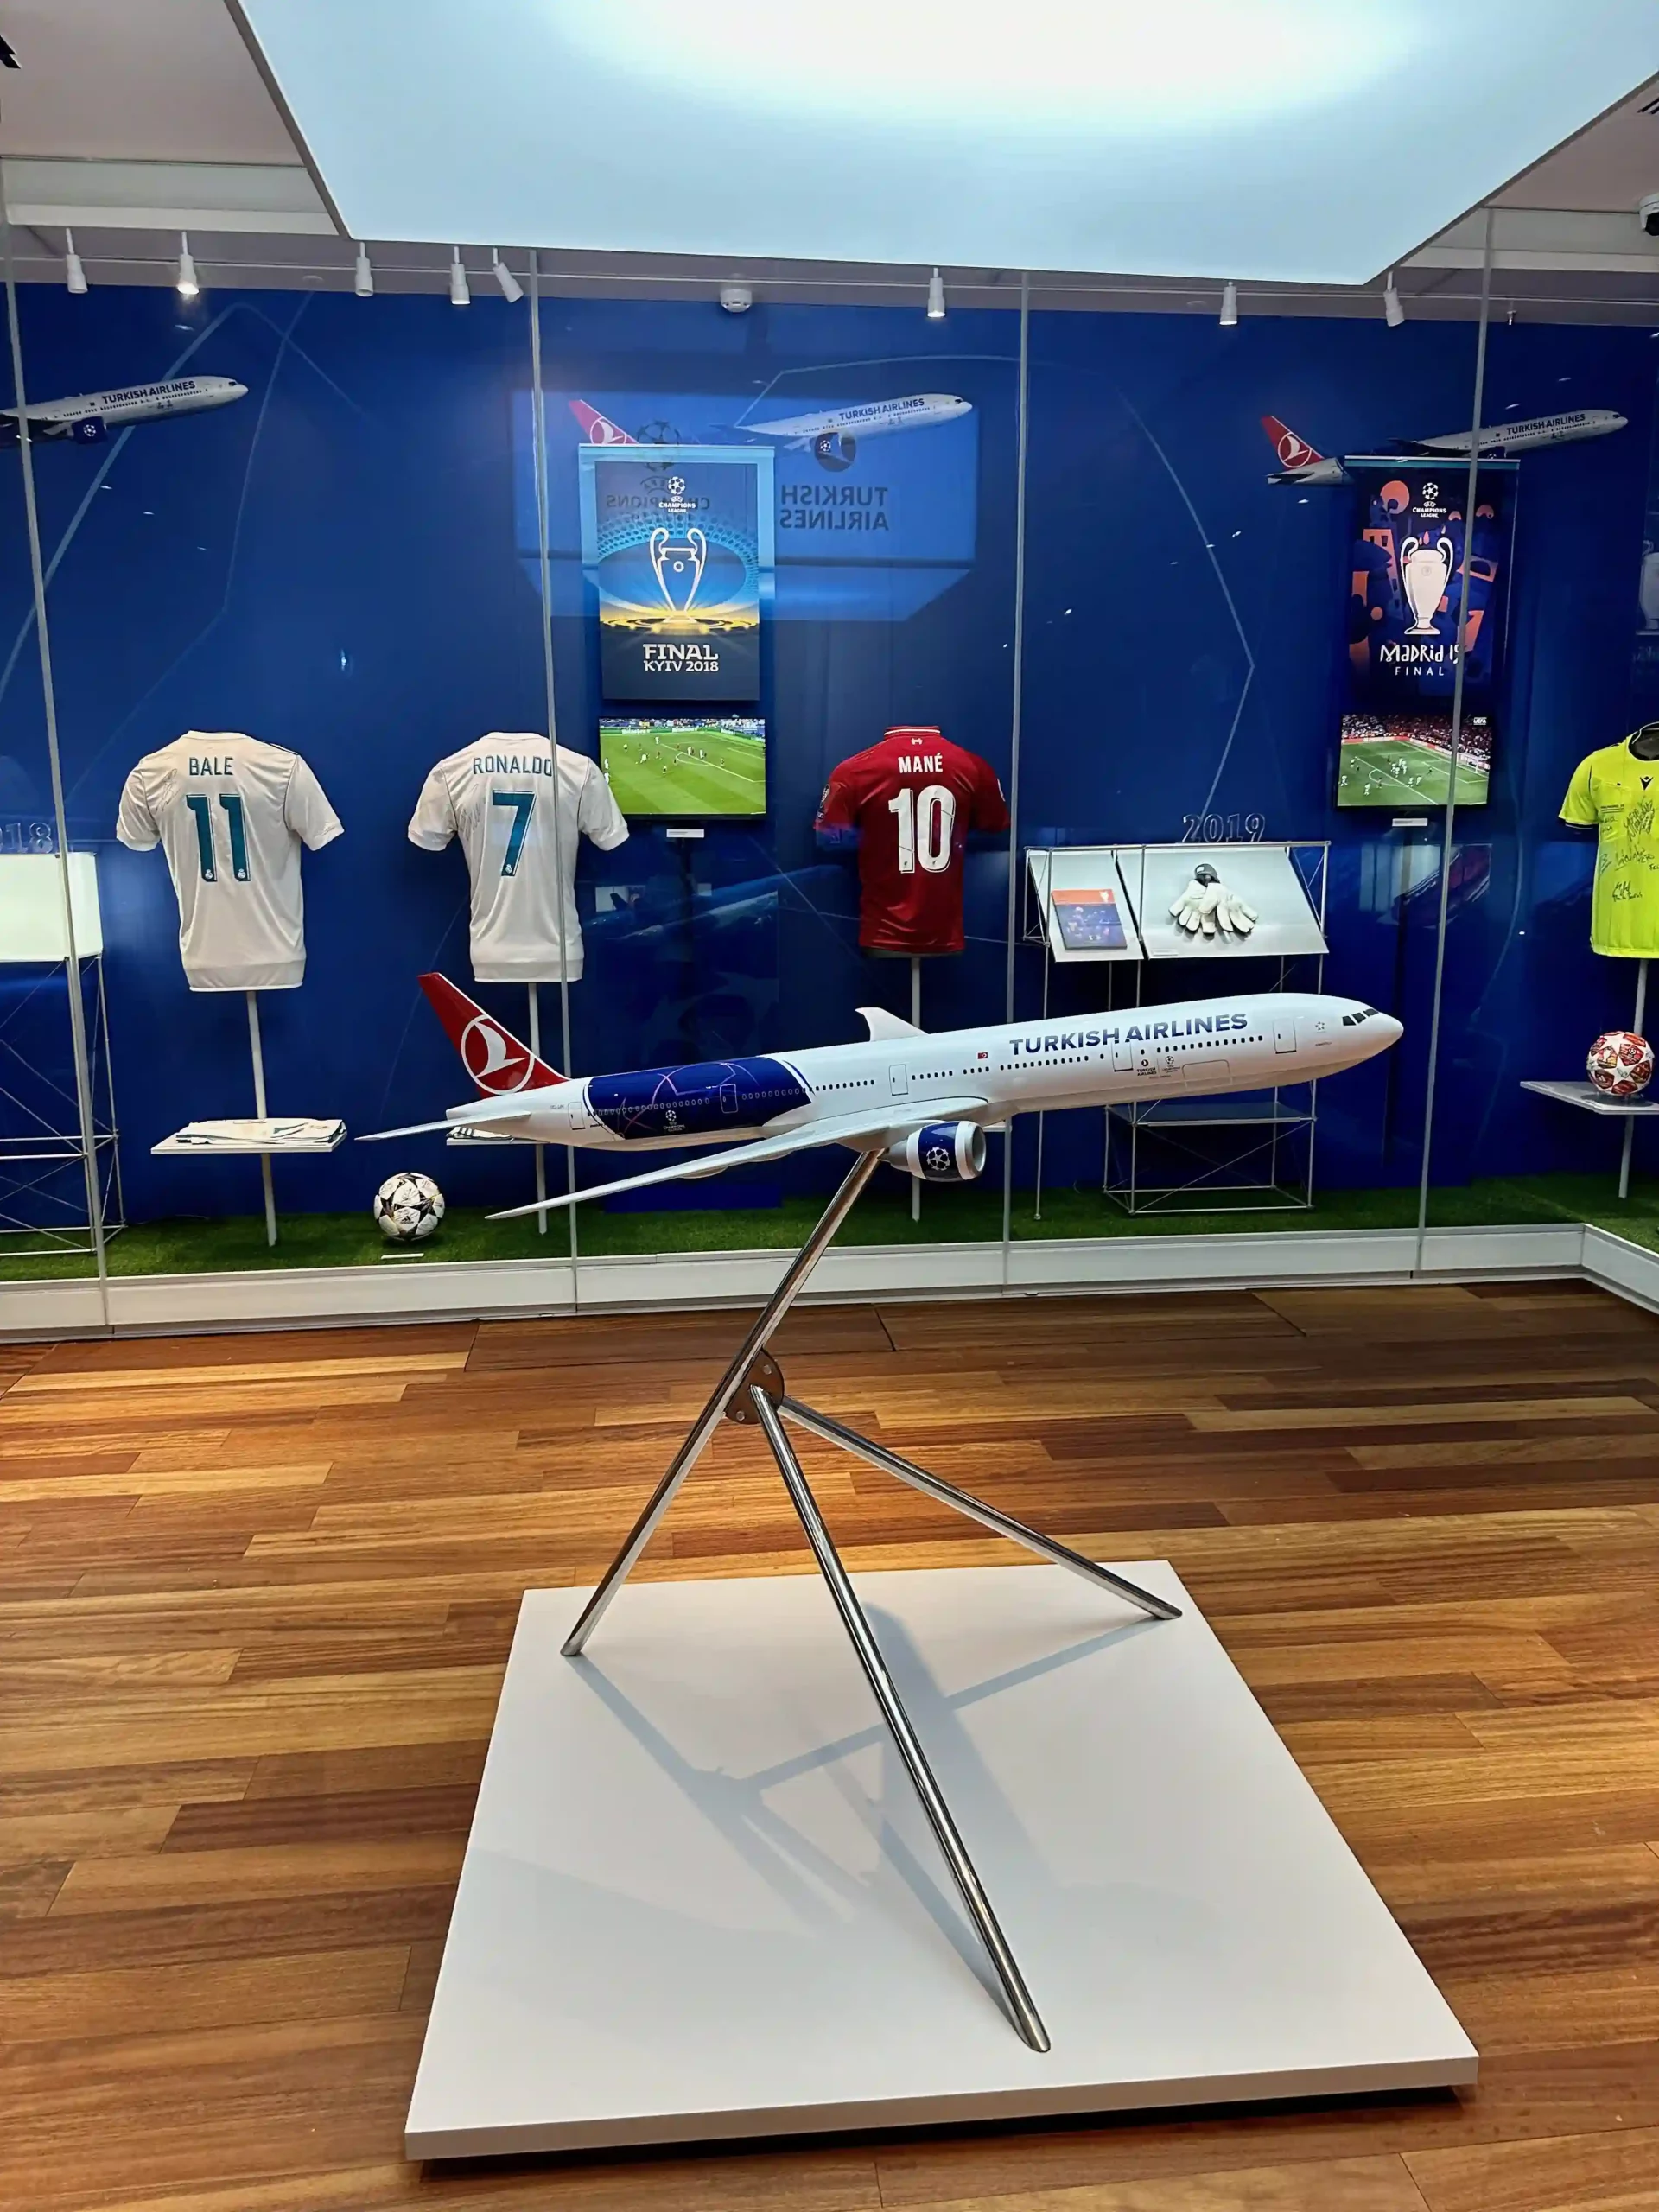 a model airplane on display in a room with football jerseys